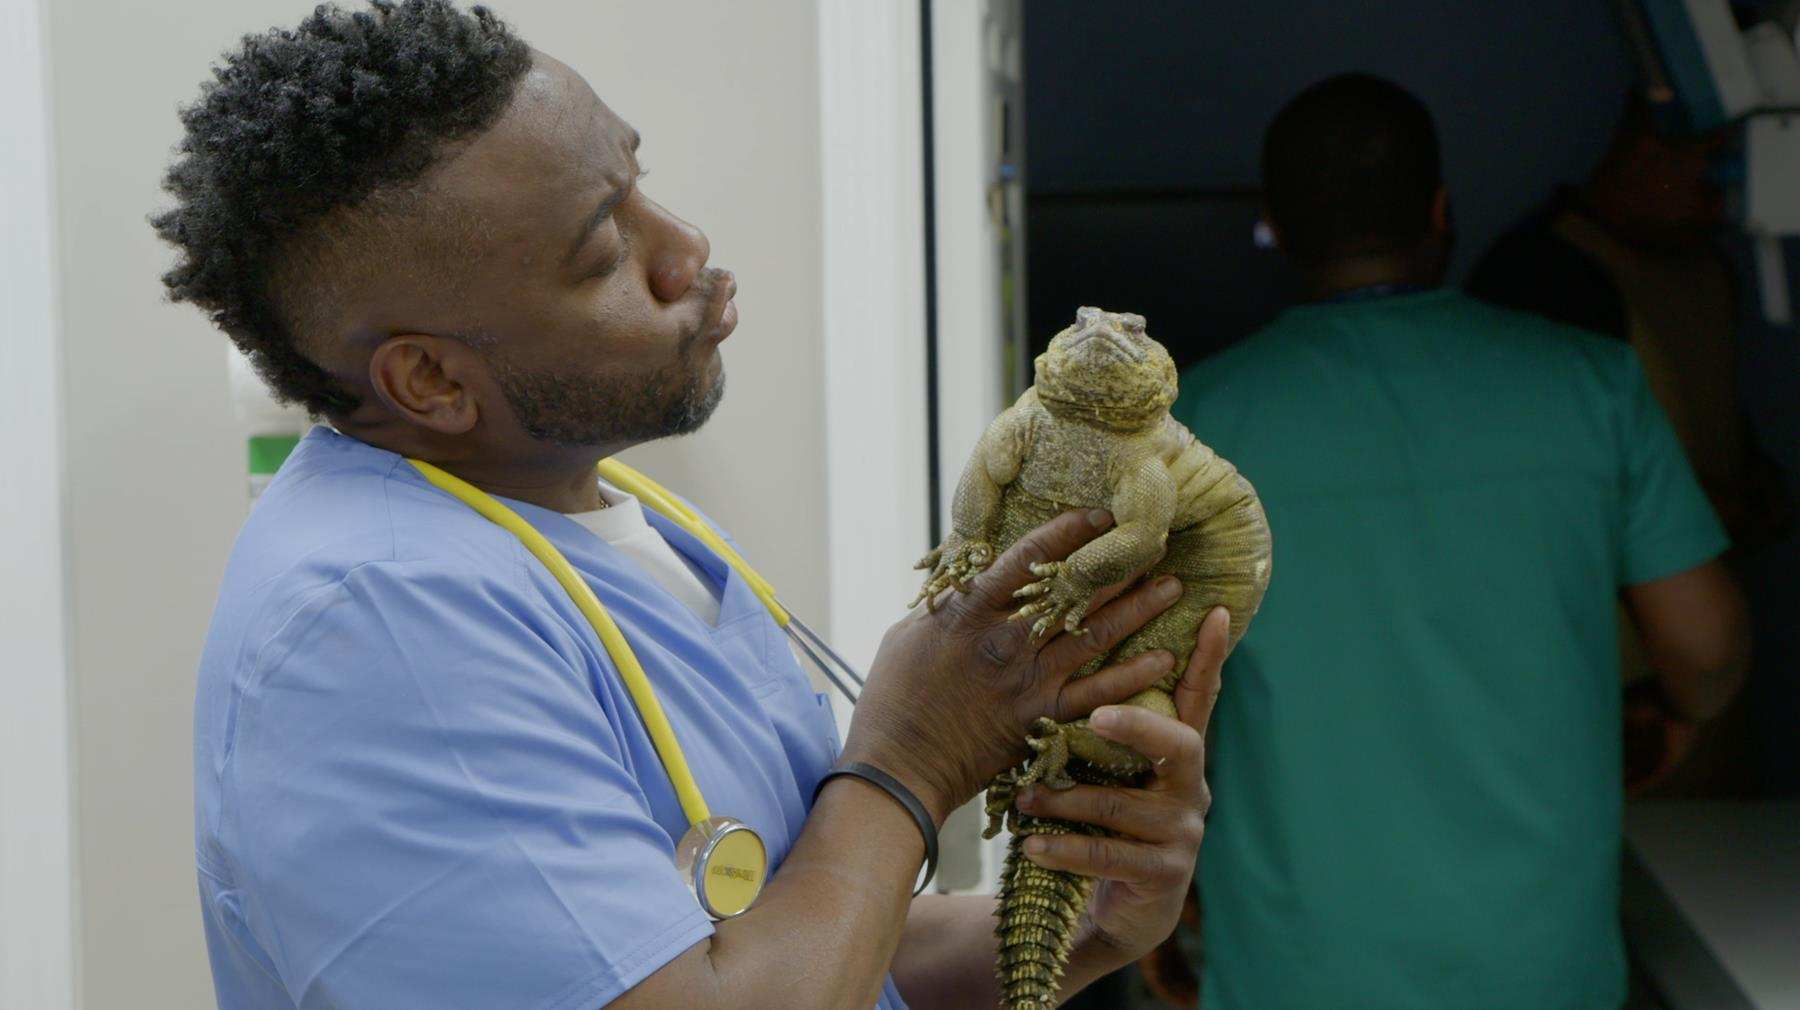 Dr. Hodges talks to Bindi the Uromastyx. Bindi's owners brought her to the clinic to see if she's pregnant, but it turns out her recent weight gain is just due to too many snacks. (National Geographic)